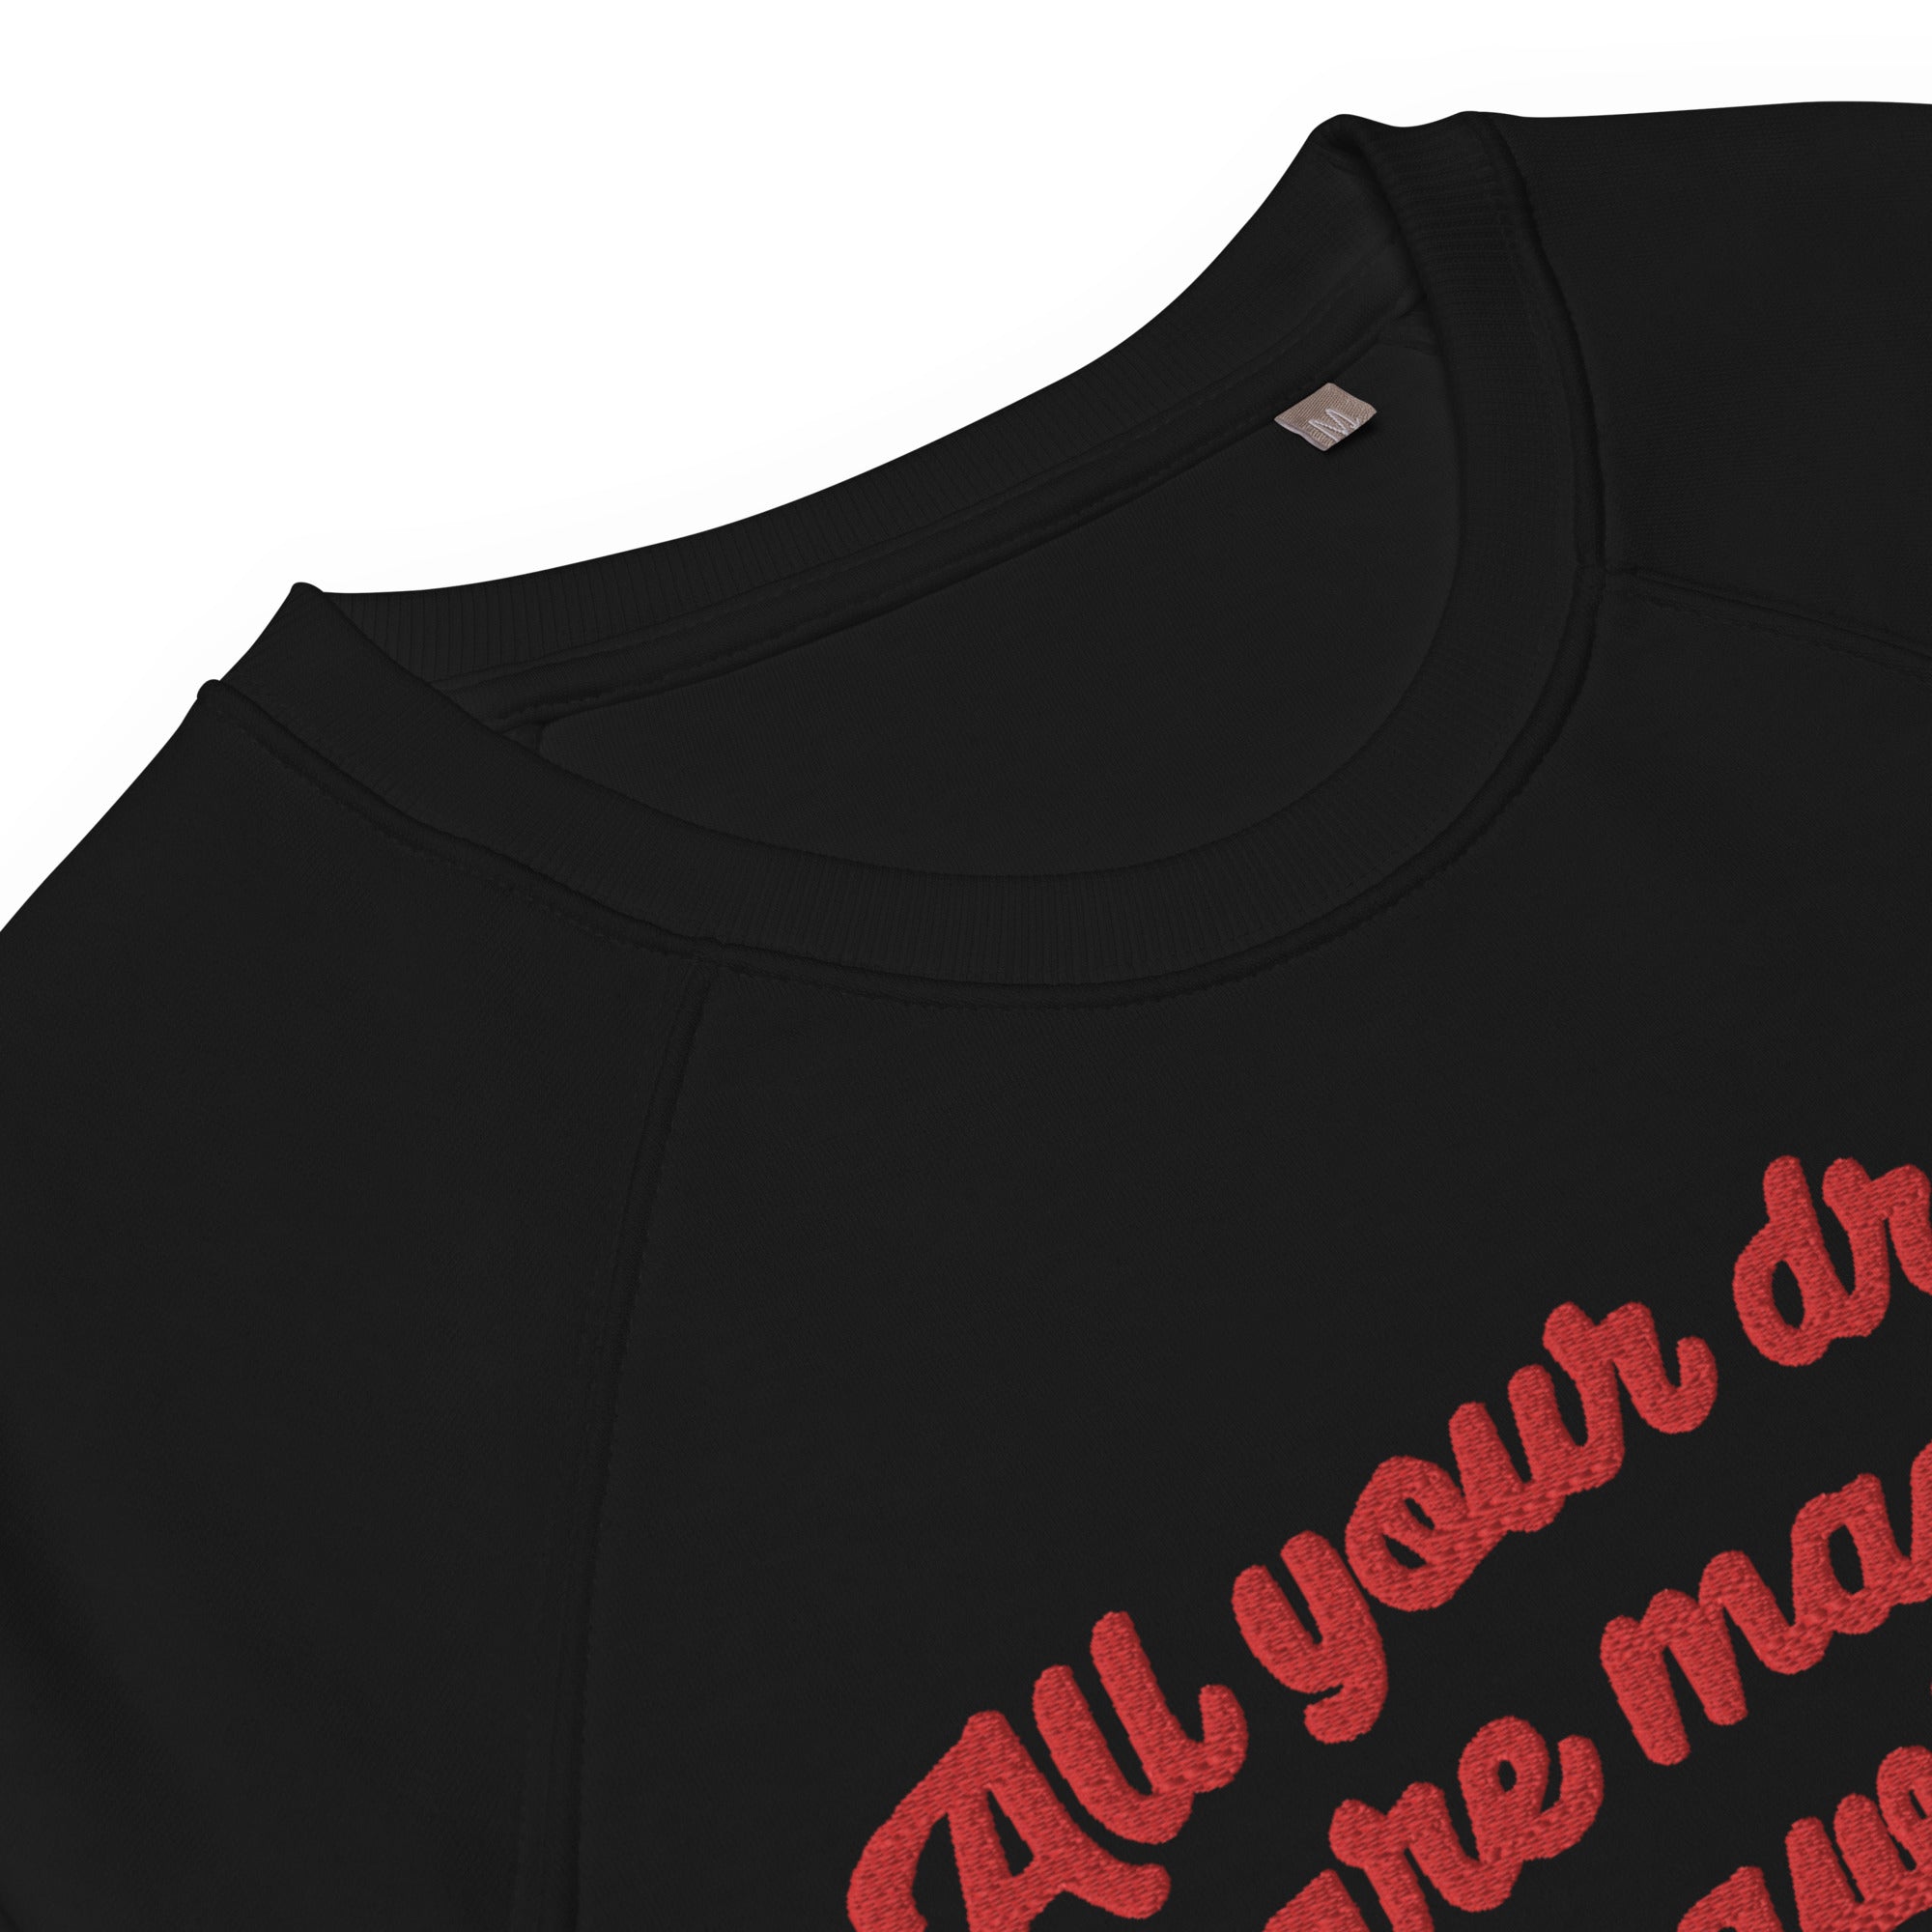 All Your Dreams Are Made Premium Lyric Embroidered Unisex organic raglan sweatshirt - Inspired by Oasis, Talk Tonight